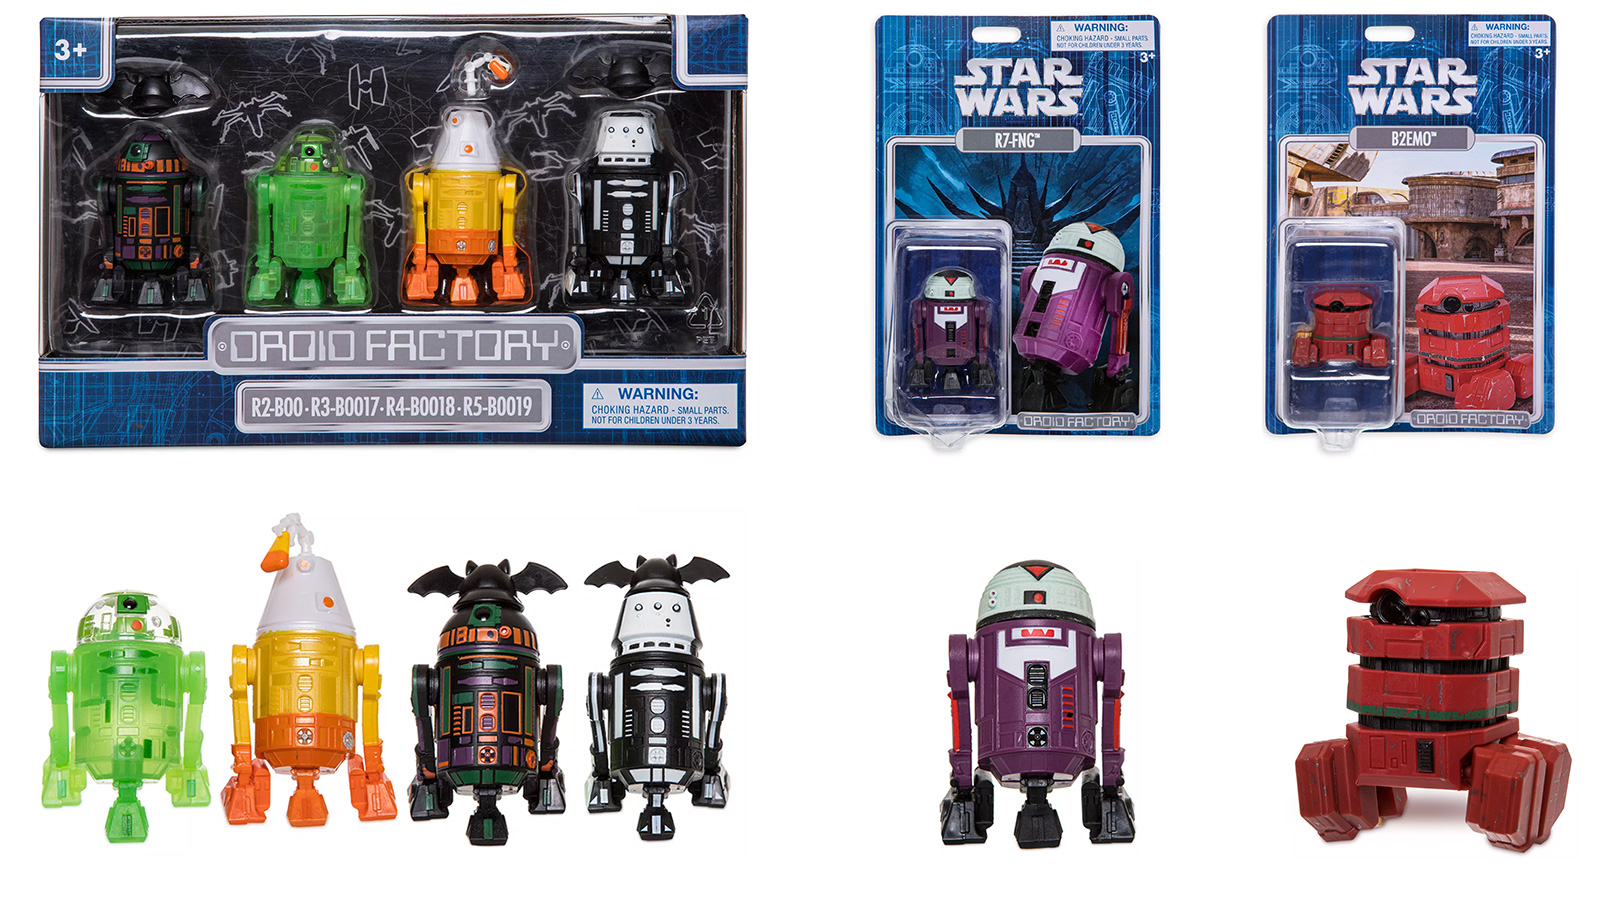 In Stock At Shop Disney - New Exclusive Droid Factory R7-FNG Halloween Droid, B2EMO Droid, And Halloween Droid Factory Set